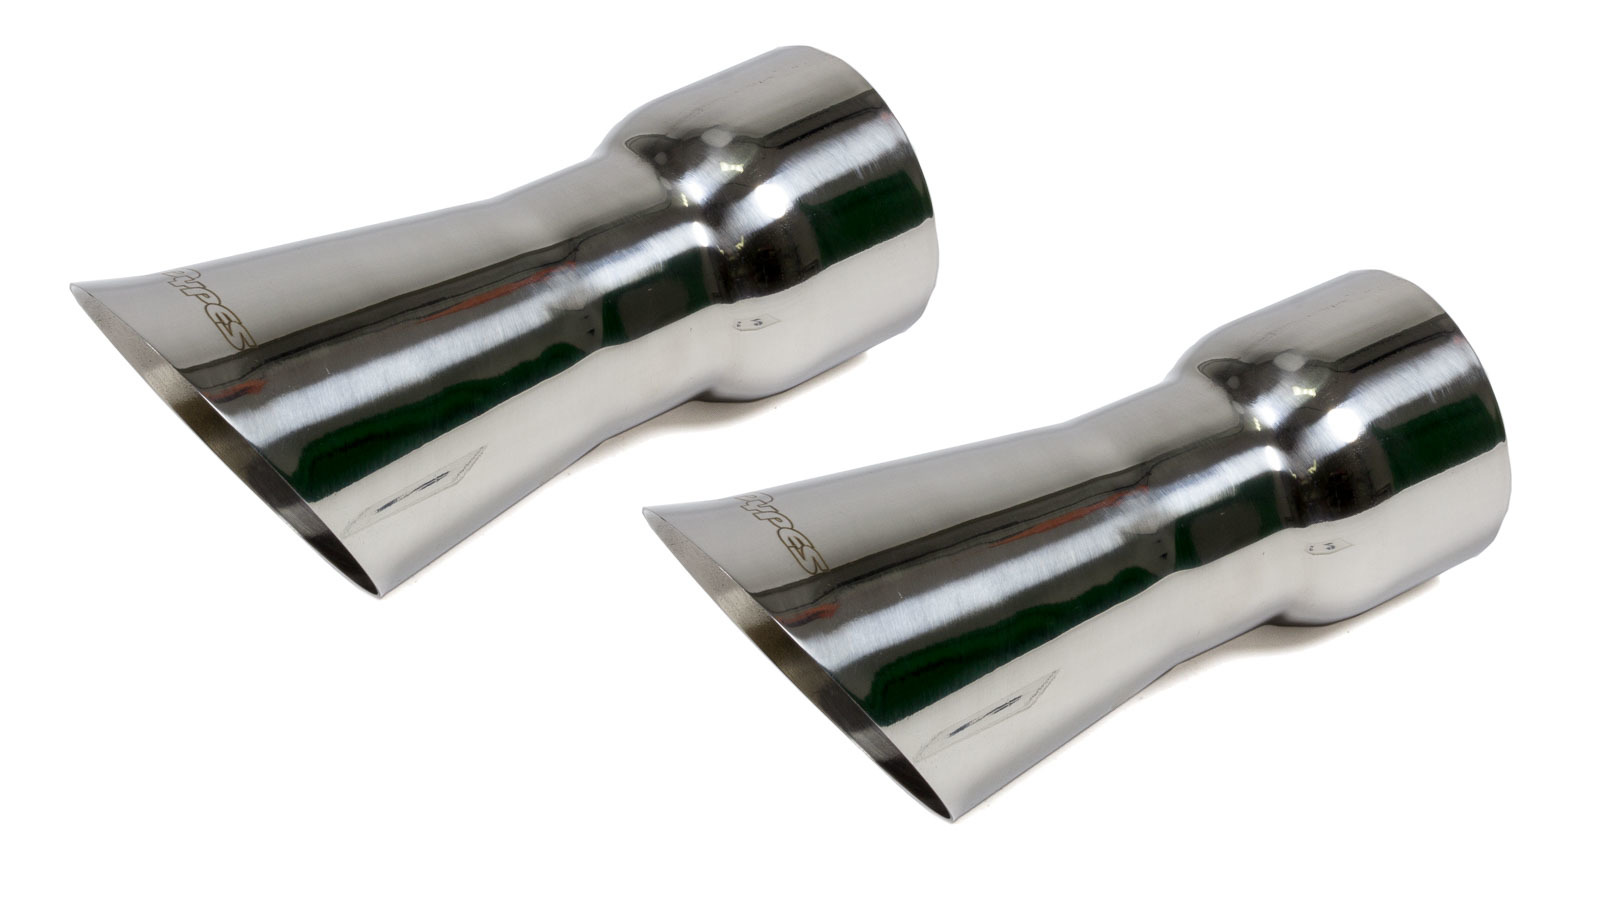 Pypes Exhaust EVT35 Exhaust Tip, Olds 442 Trumpet Exhaust Tips, Slip-On, 3 in Inlet, 4 in Round Outlet, 8-1/8 in Long, Single Wall, Cut Edge, Trumpet Cut, Stainless, Polished, Pair